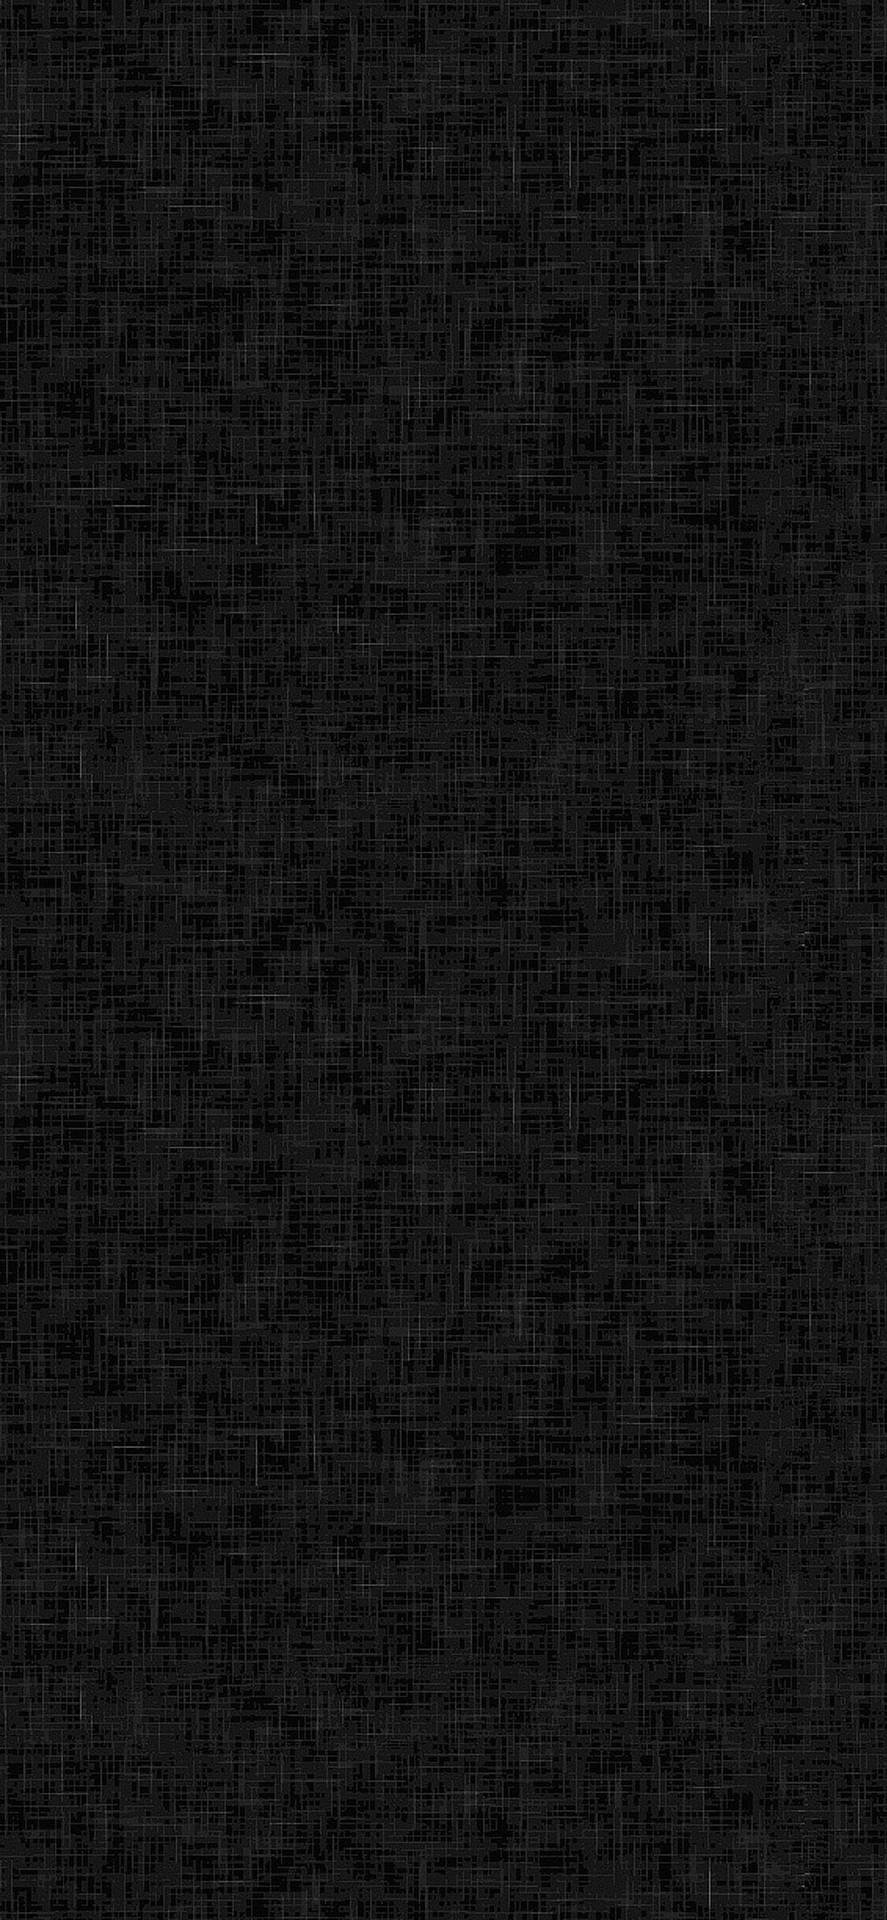 Textured Pattern On Black Leather iPhone Wallpaper